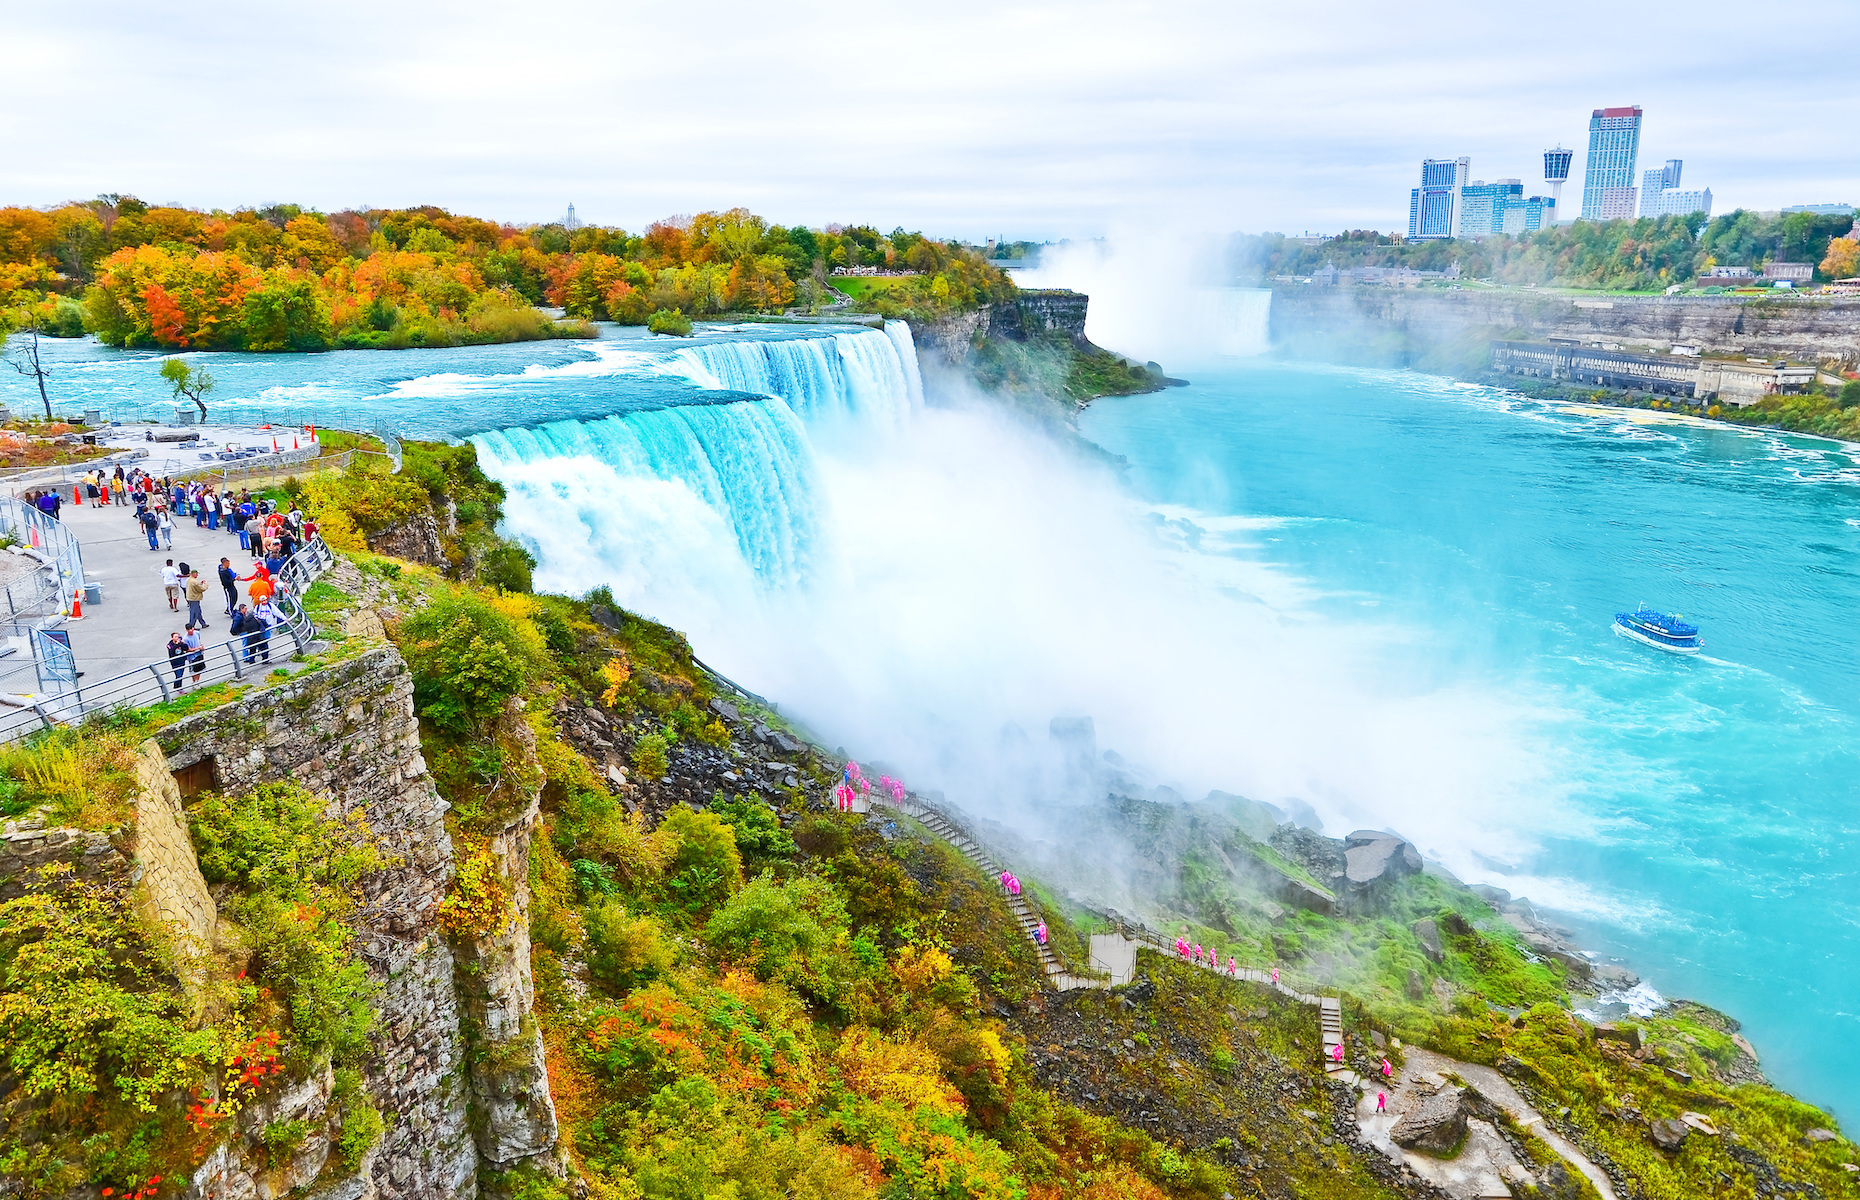 <p>The Niagara Falls, located on the Canada–United States border, are a preeminent attraction that draws tourists from both countries. The autumn display is even more impressive. <a href="https://www.niagarafallstourism.com/seasons/autumn/" rel="noreferrer noopener">Primarily composed of maple trees, the woods and parks near the falls blaze with red and orange hues.</a></p>